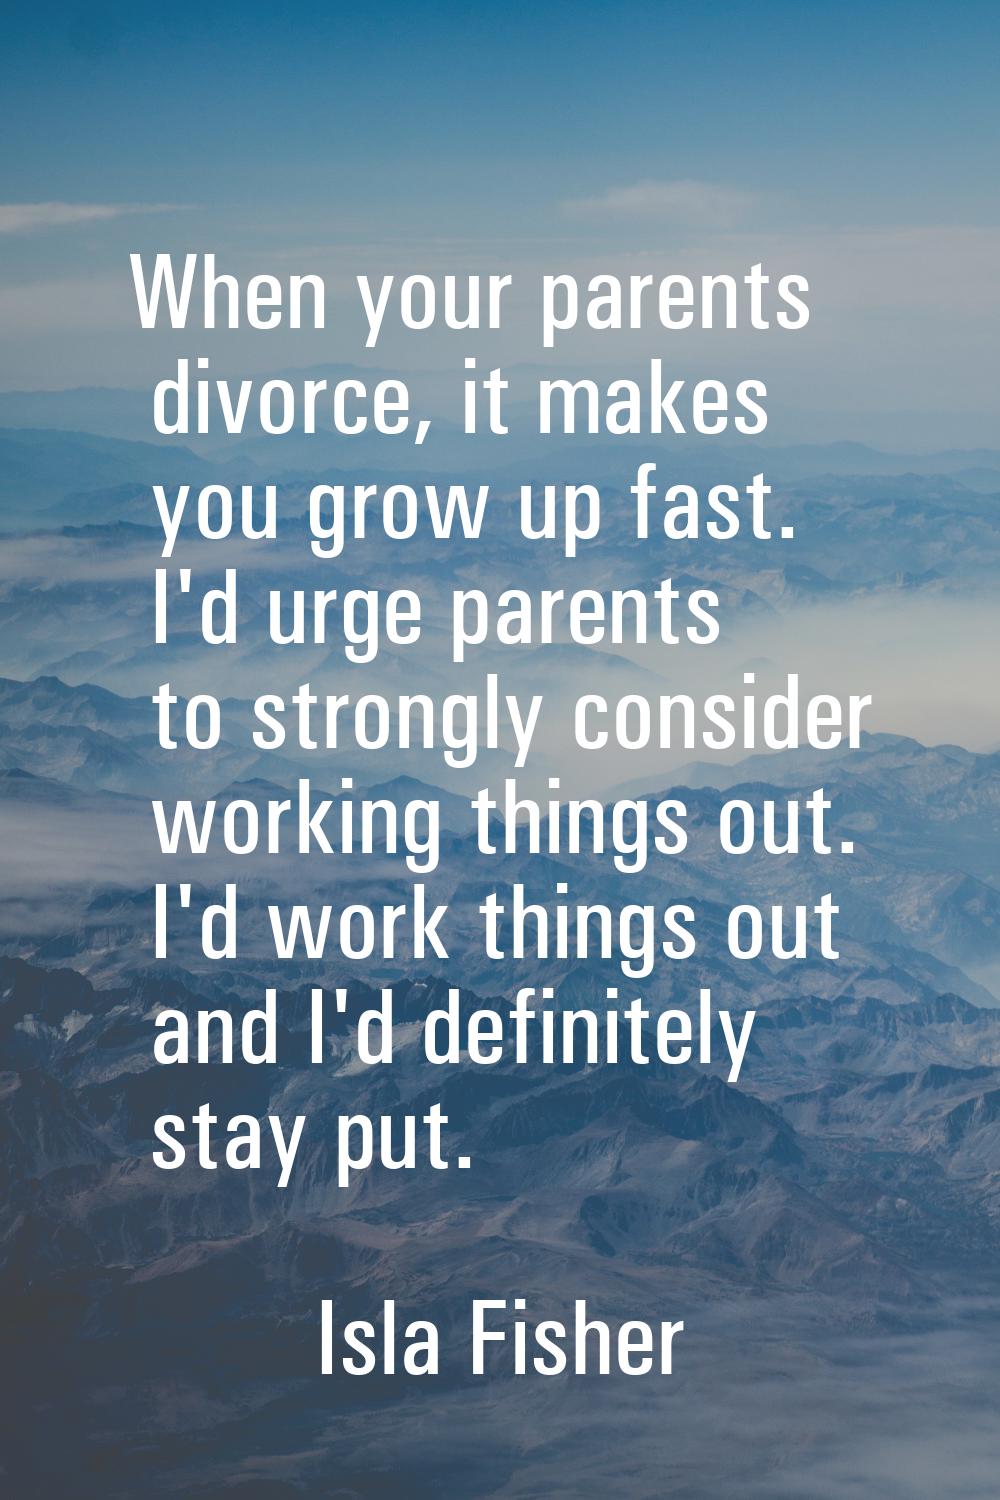 When your parents divorce, it makes you grow up fast. I'd urge parents to strongly consider working